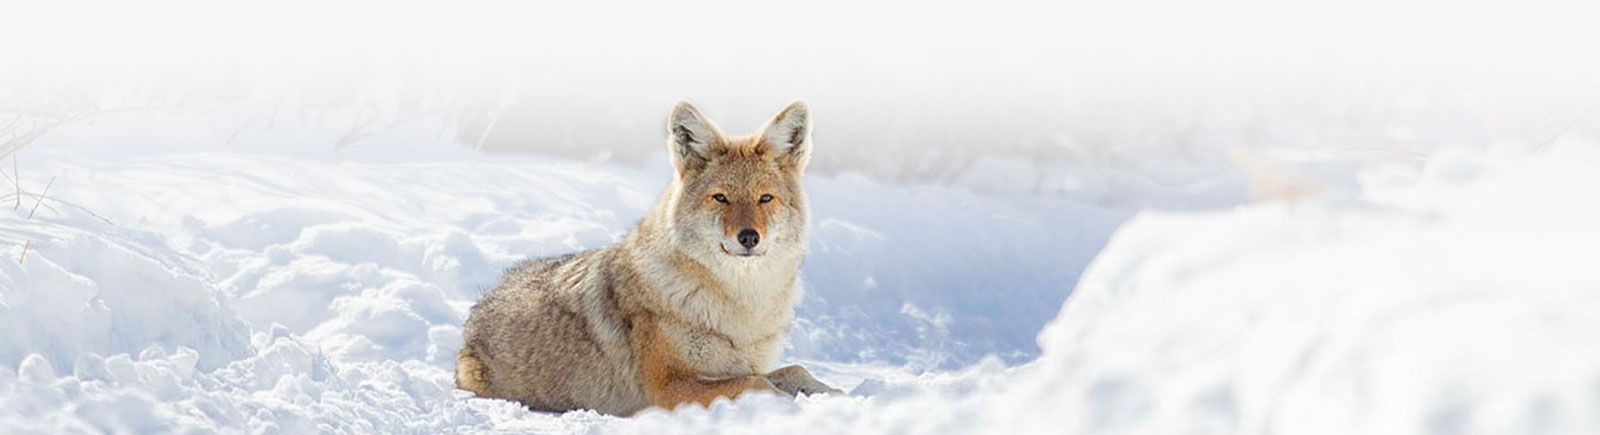 Coyote Watch Canada